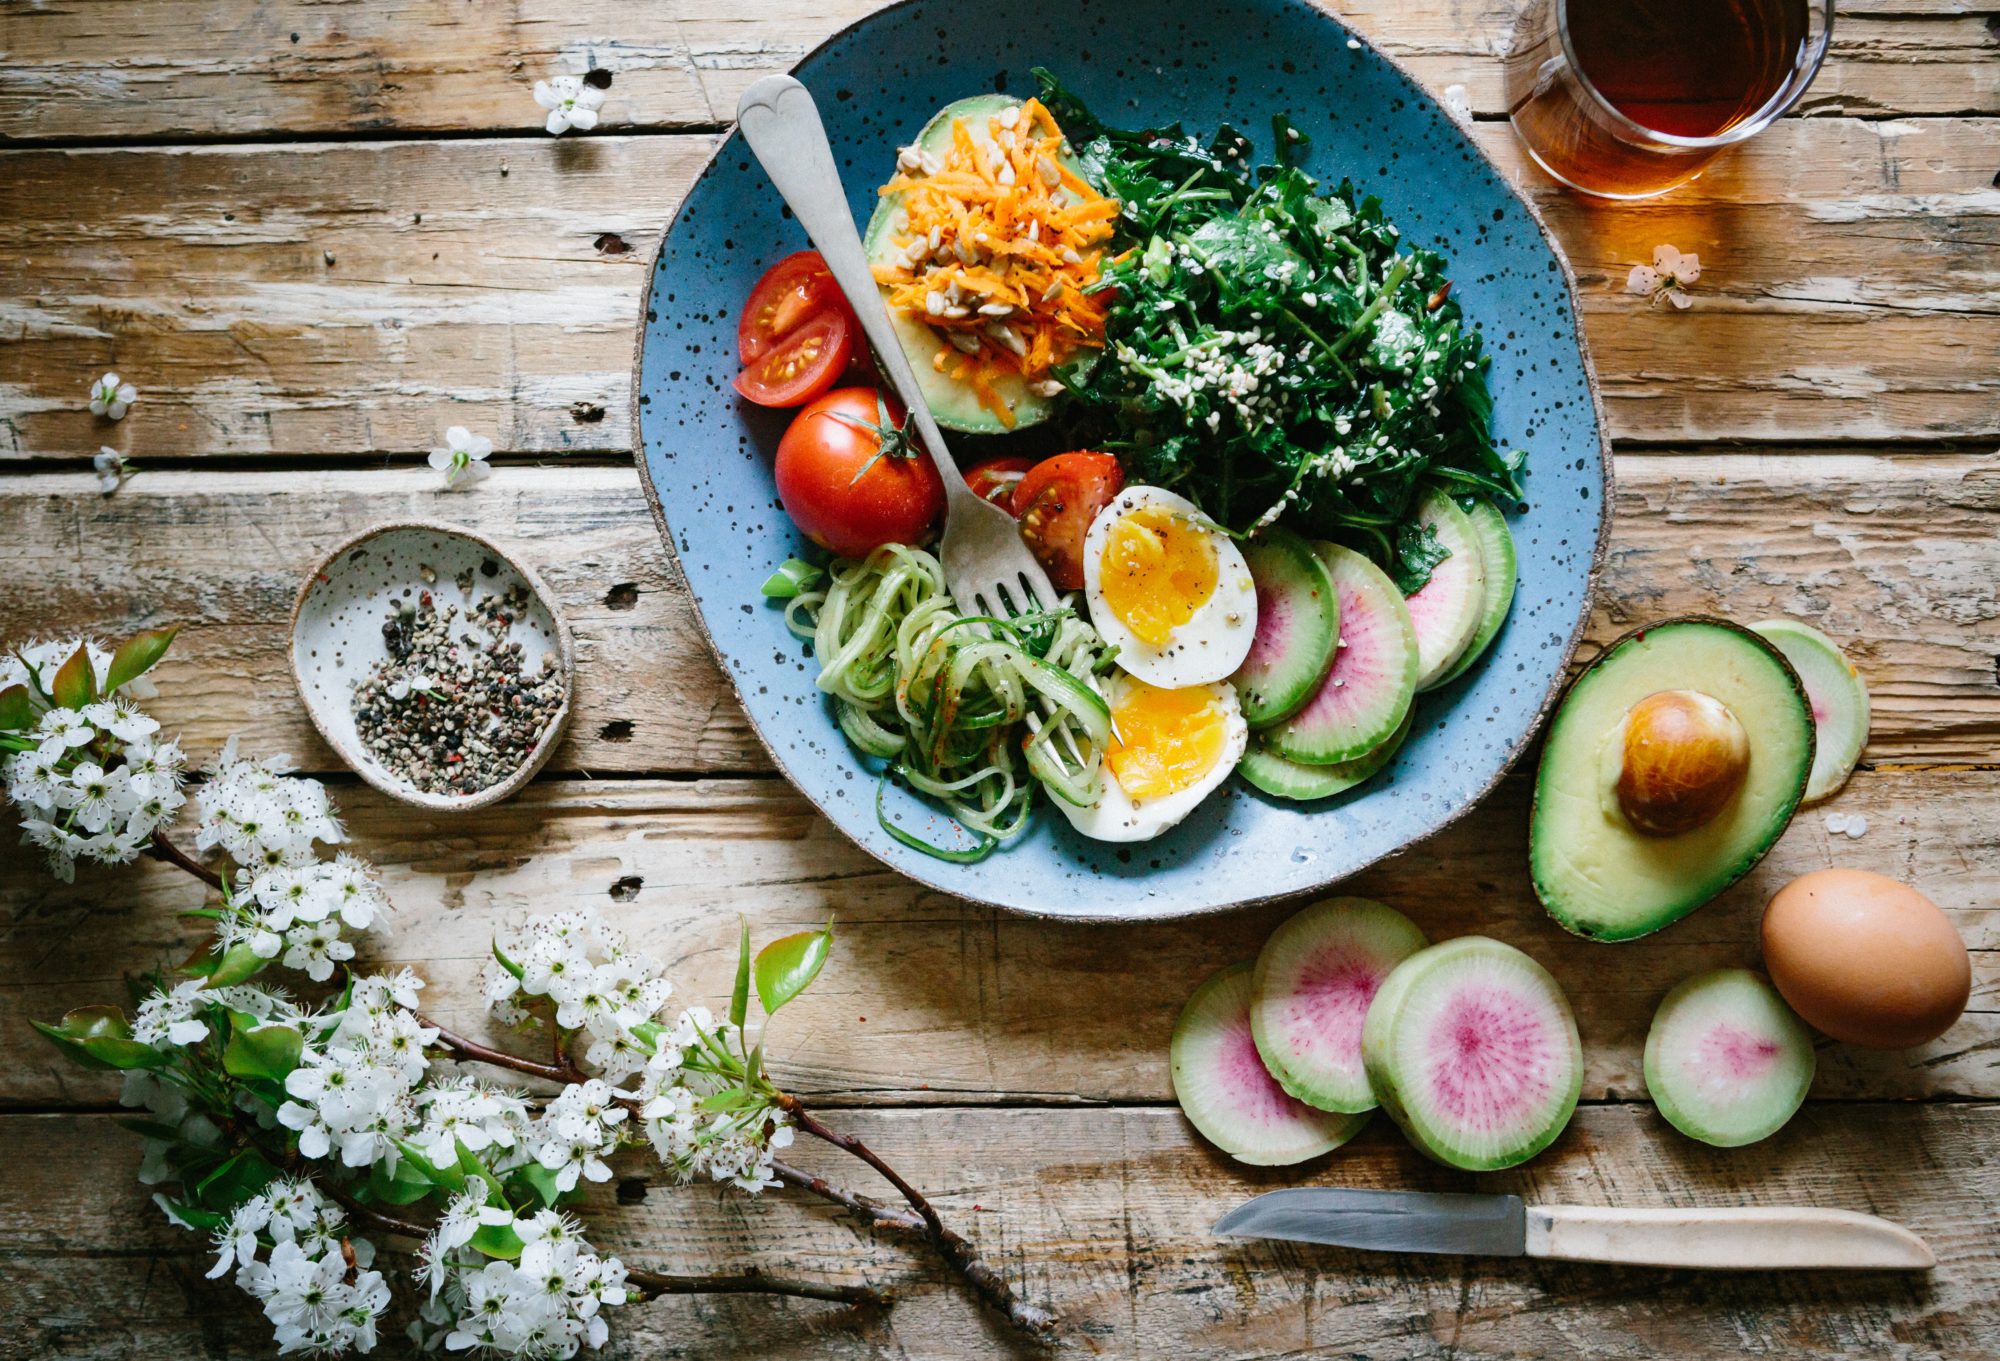 The Paleo Diet: How Well Do You Know It?